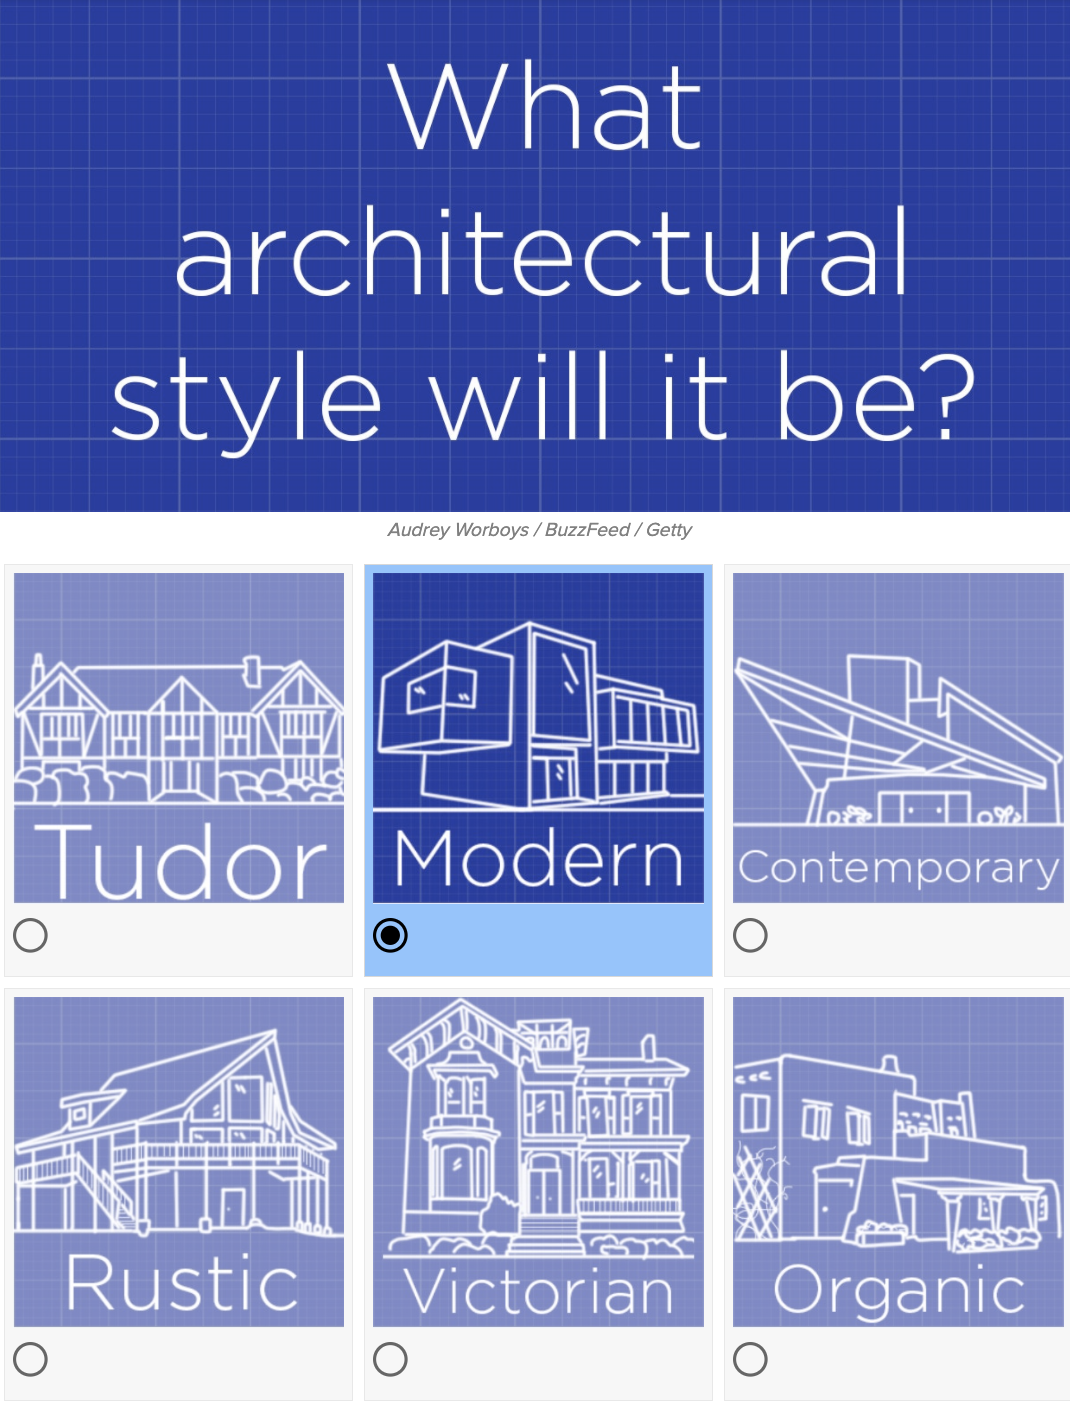 A question in the quiz asking what architectural style your home will be